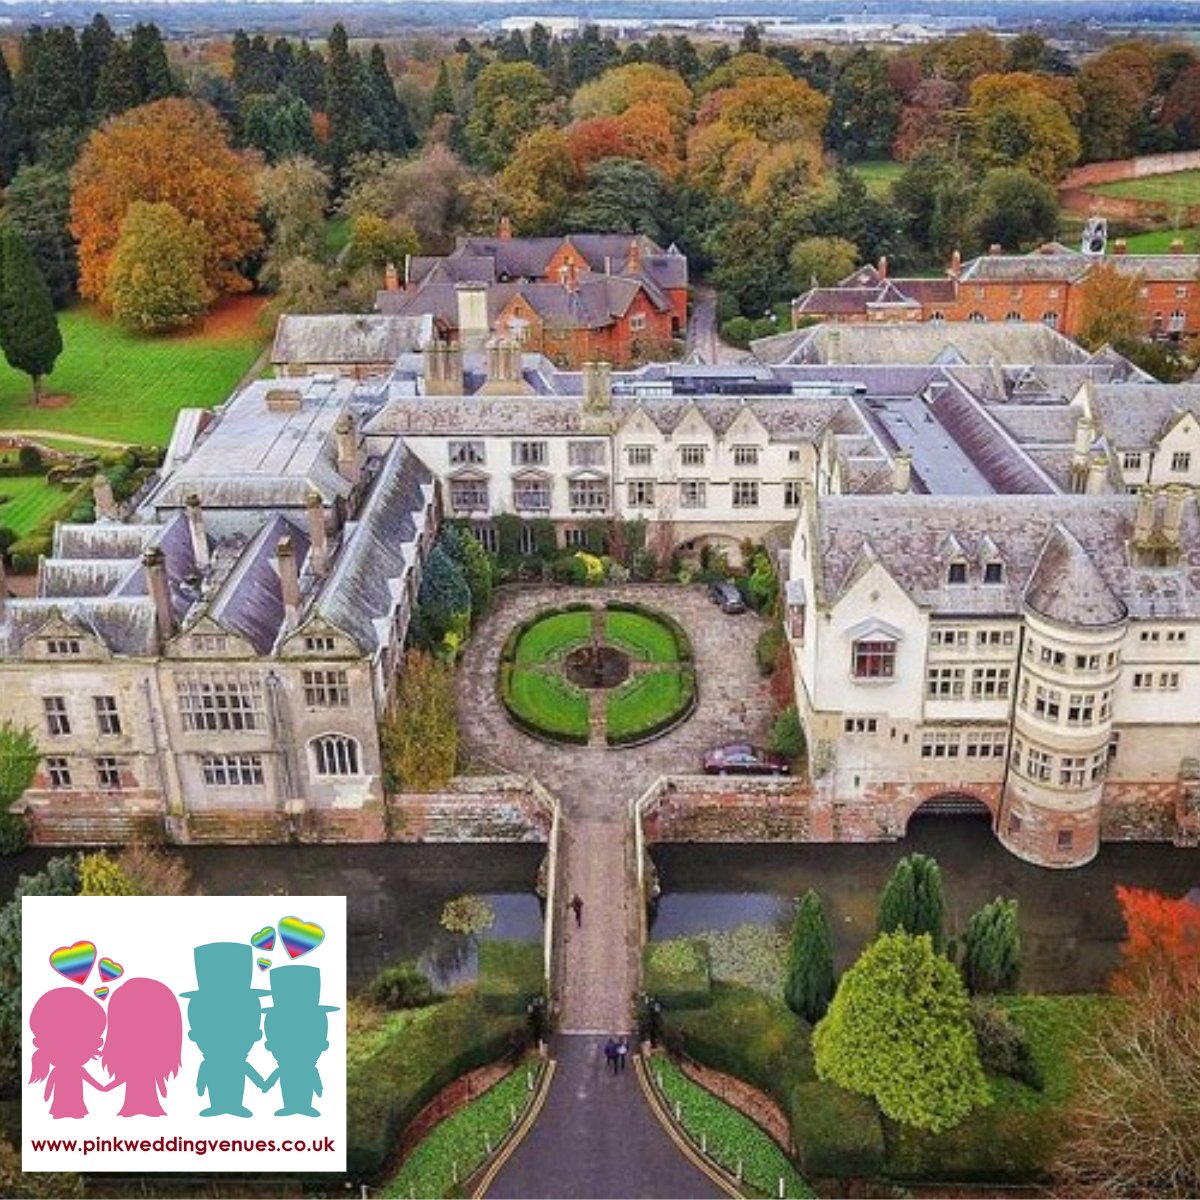 Following the launch of our 10 Diamonds advertising package, we're welcoming Coombe Abbey Hotel, in #warwickshire to our @PinkVenues collection of #LGBTQ friendly #weddingvenues! ~ bit.ly/44pYWeB #weddingwednesday #LGBTQIA #weddings #weddingvenue #samesexweddings